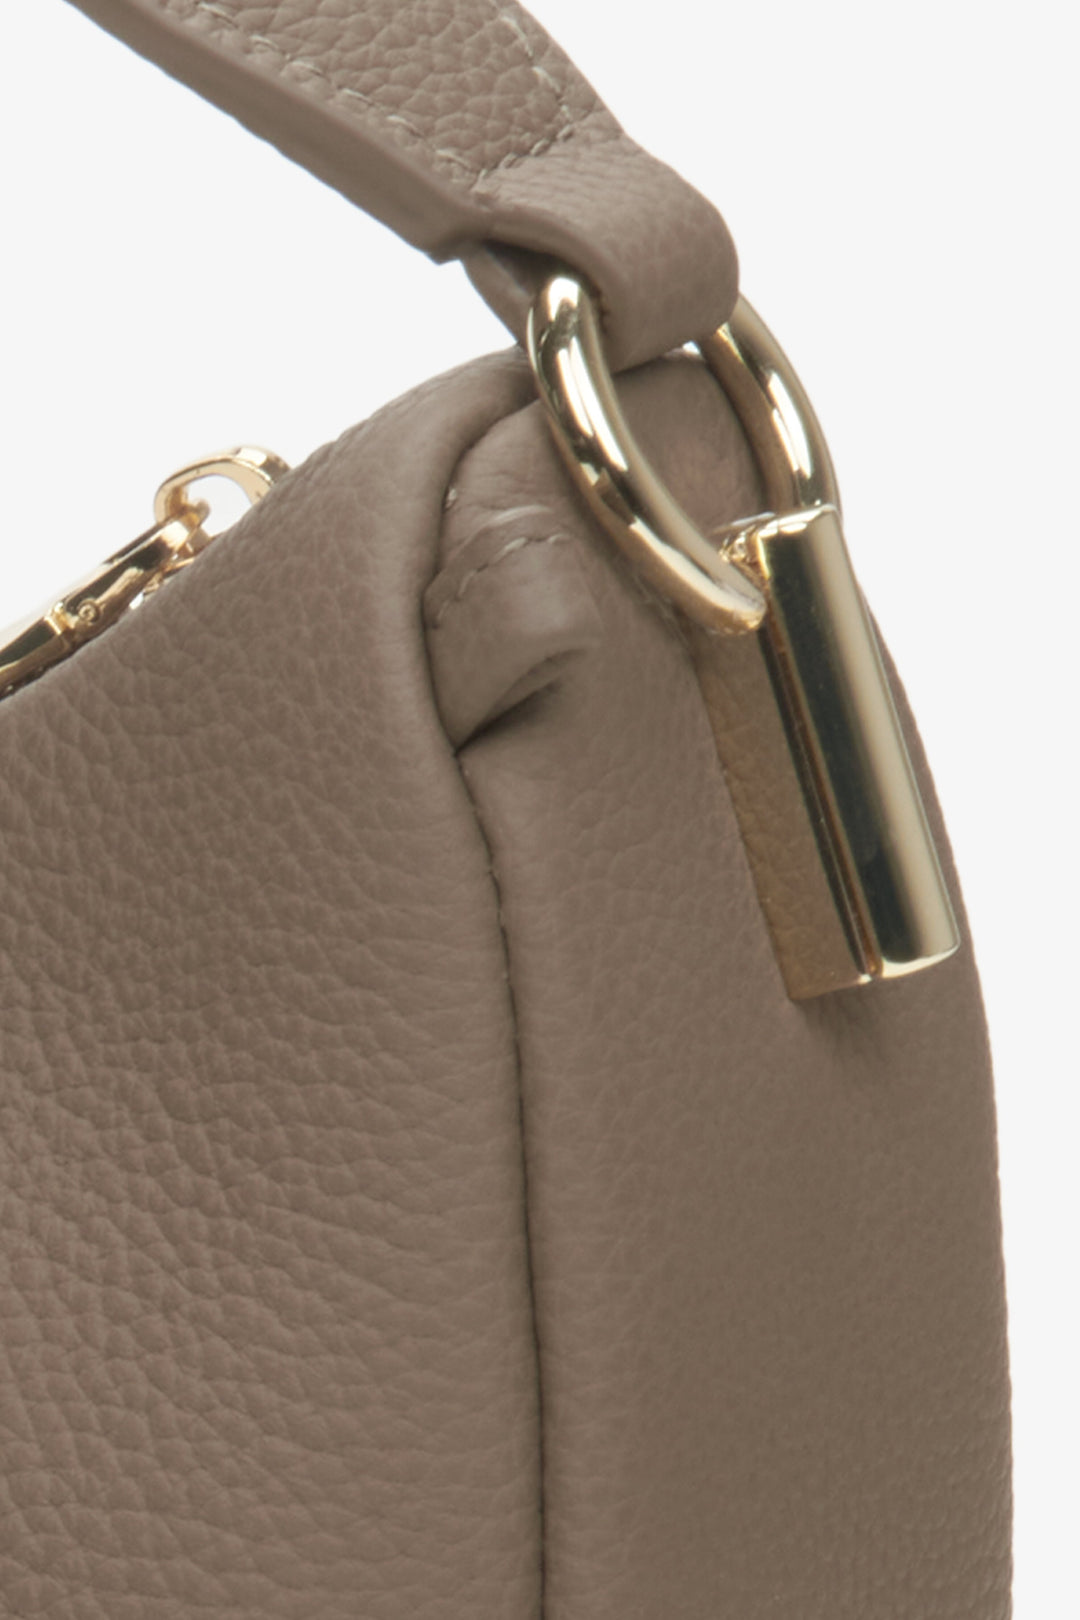 Close-up of the details of the brown crescent-shaped women's handbag by Estro.